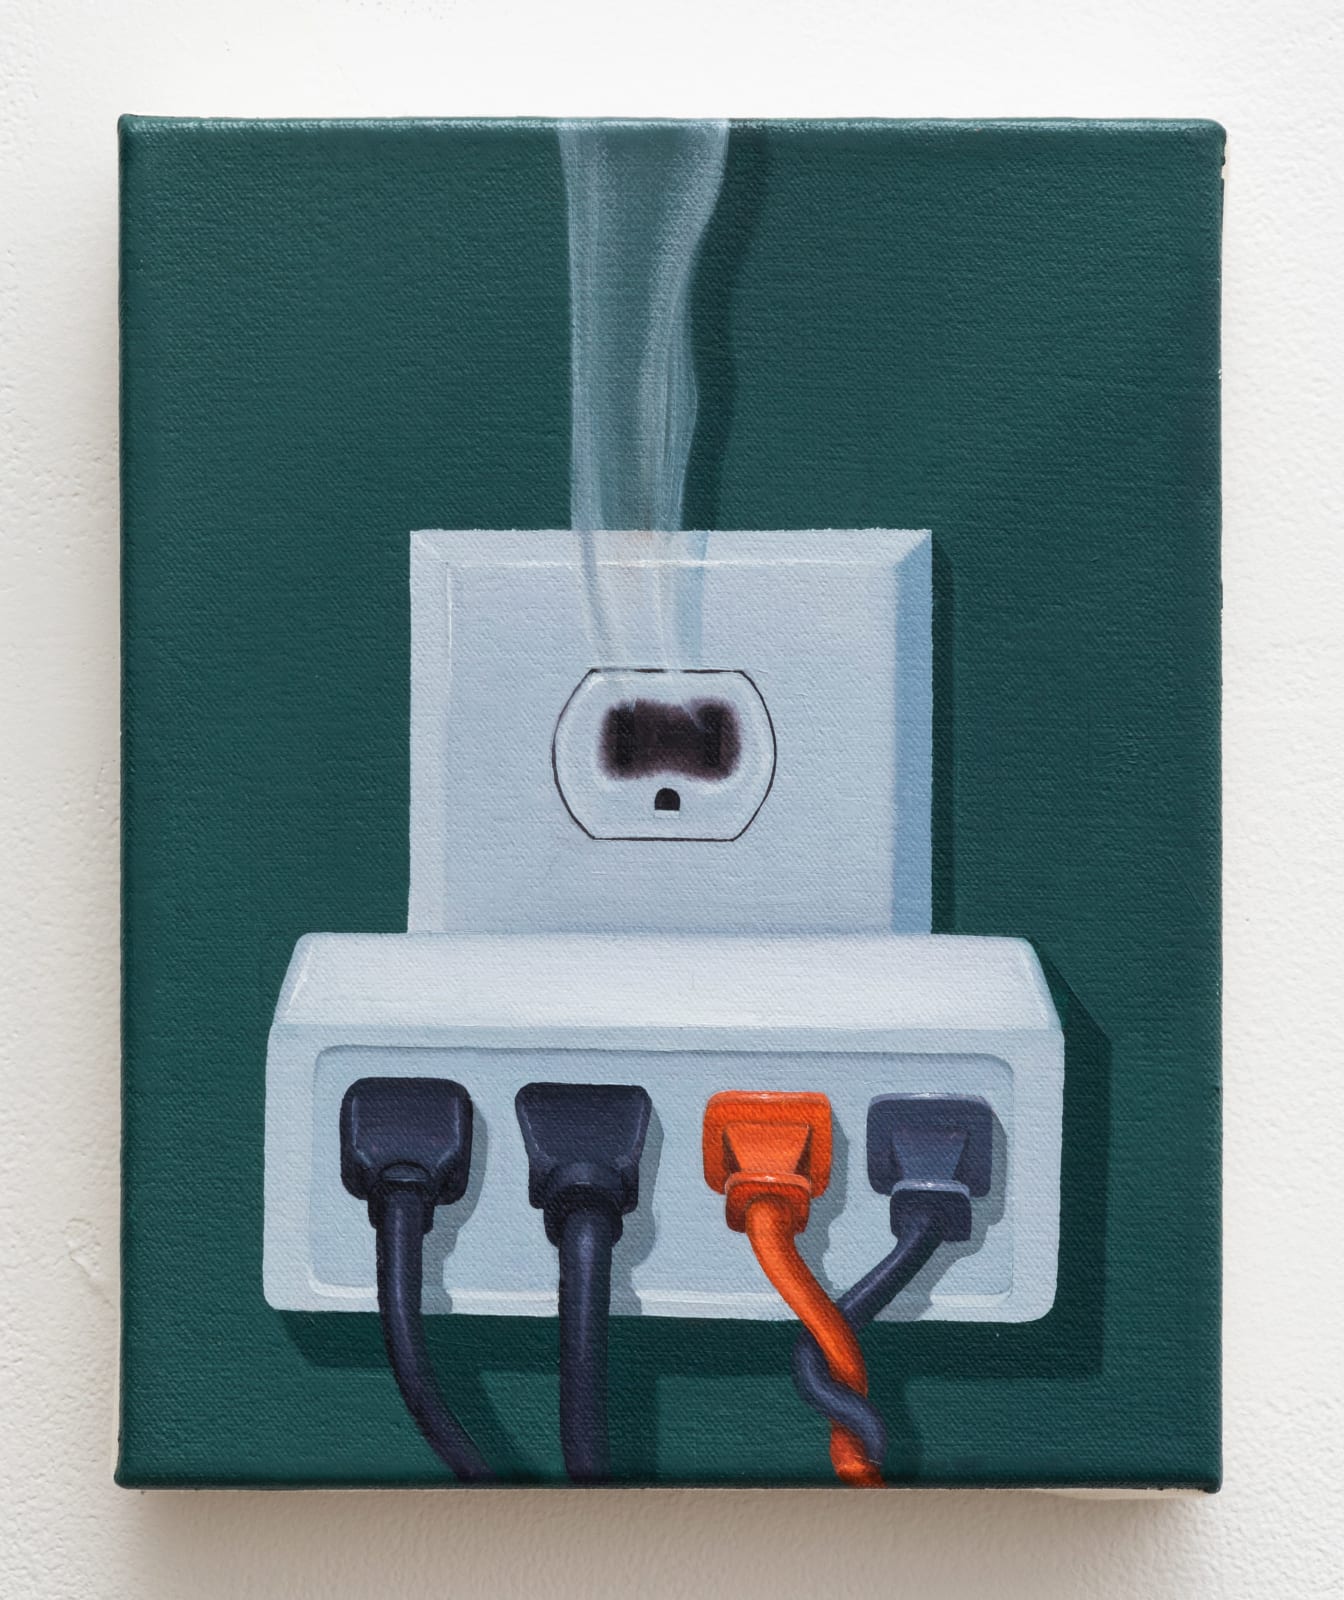 Painting portraying an electric outlet with an extension port for four cables, one of which is orange and entangled with another black cord. Smoke comes out of the top port.